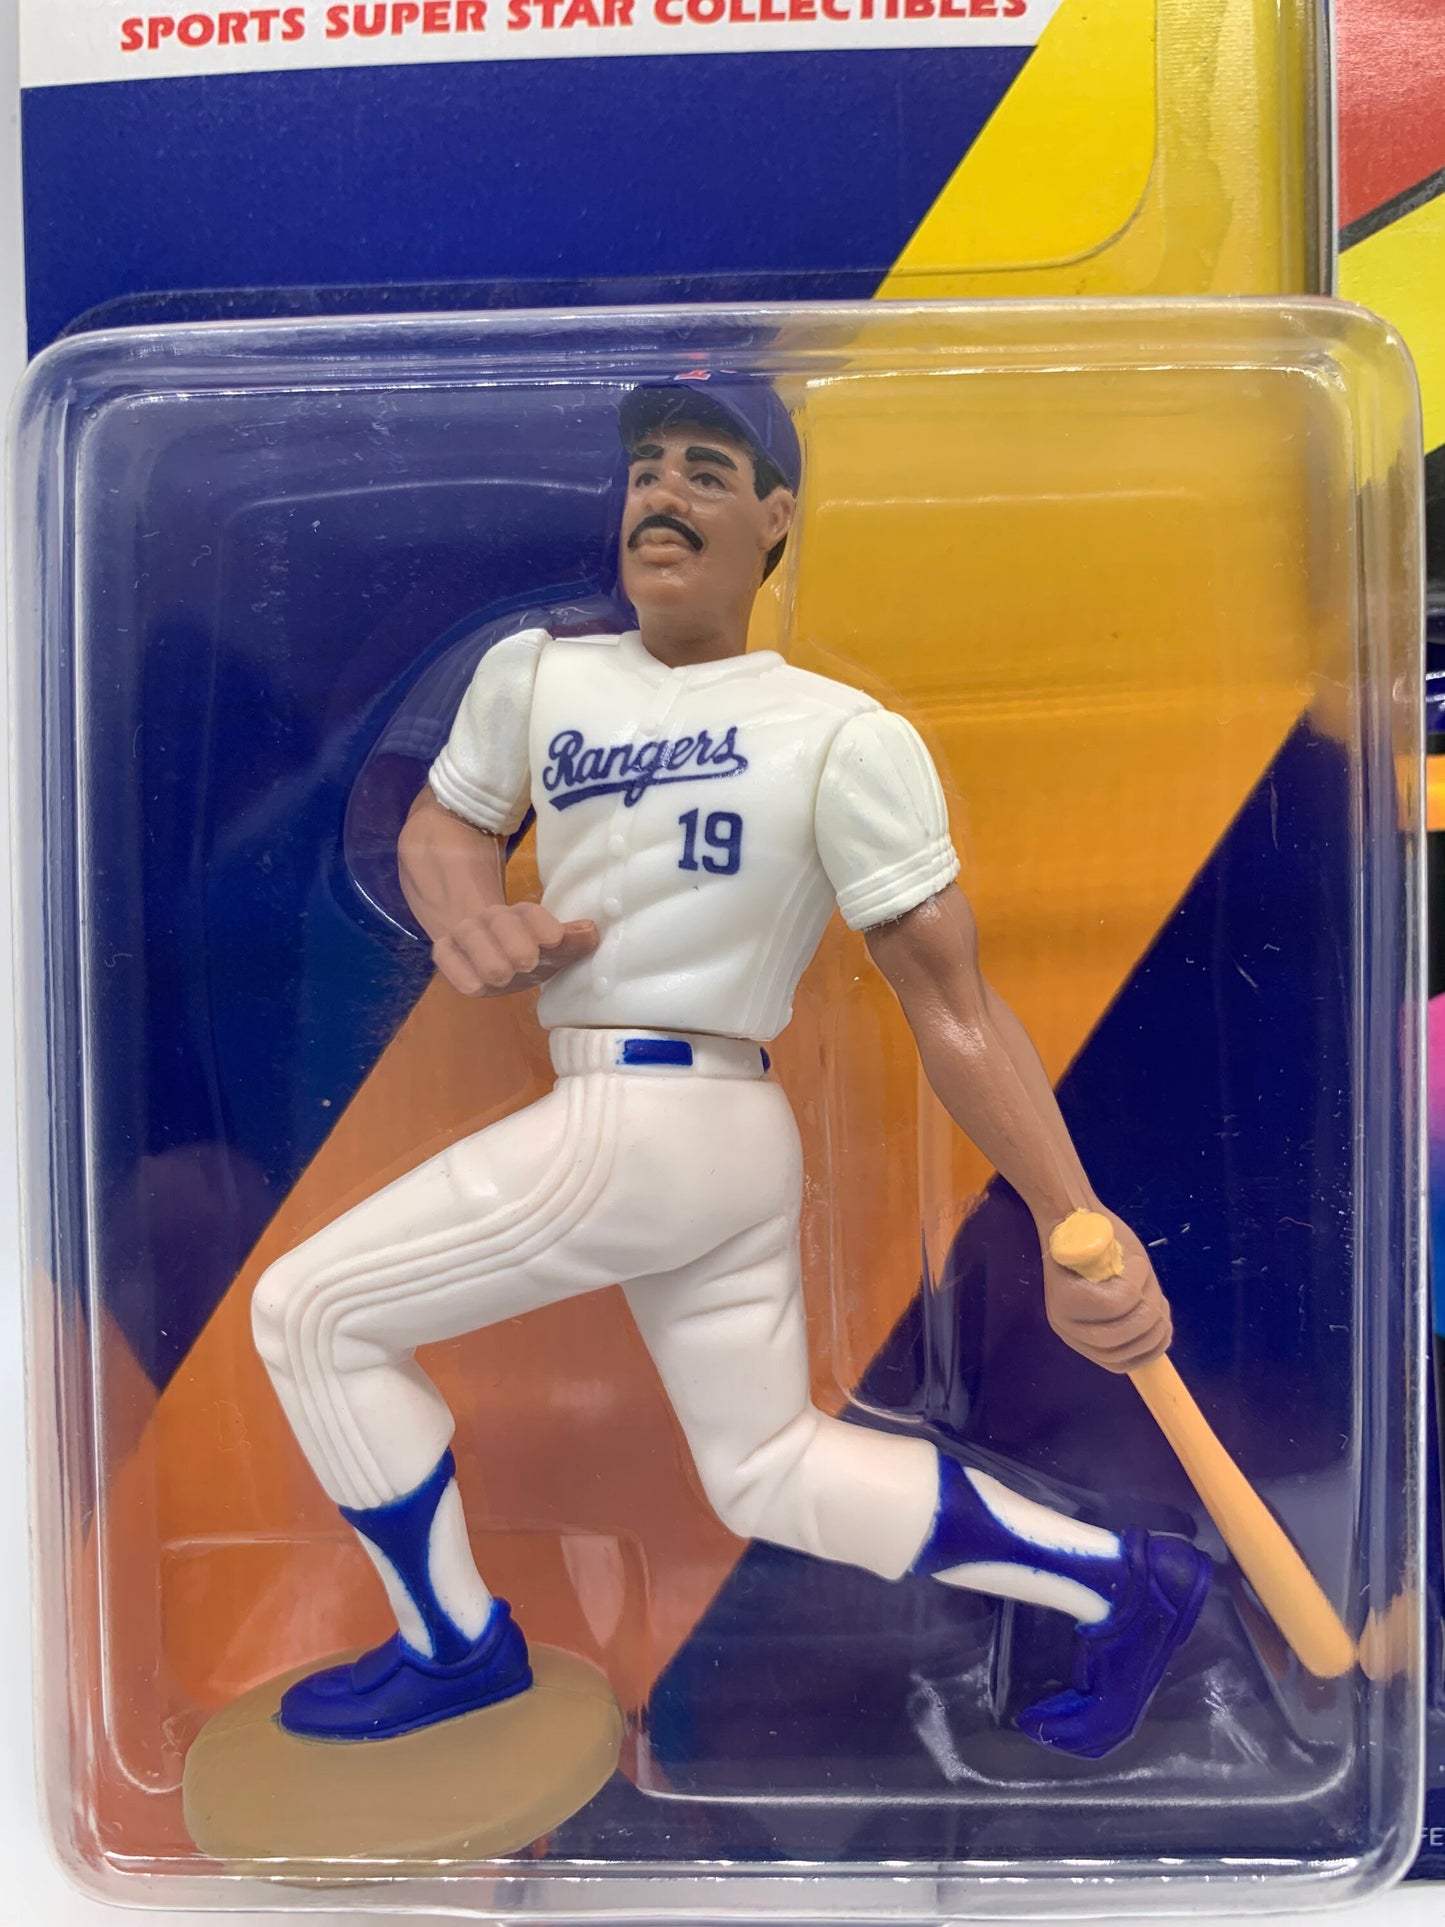 Starting Lineup Juan Gonzalez Texas Rangers Action Figure White 1992 Kenner Collectable MLB Baseball Figurine Perfect Birthday Gift